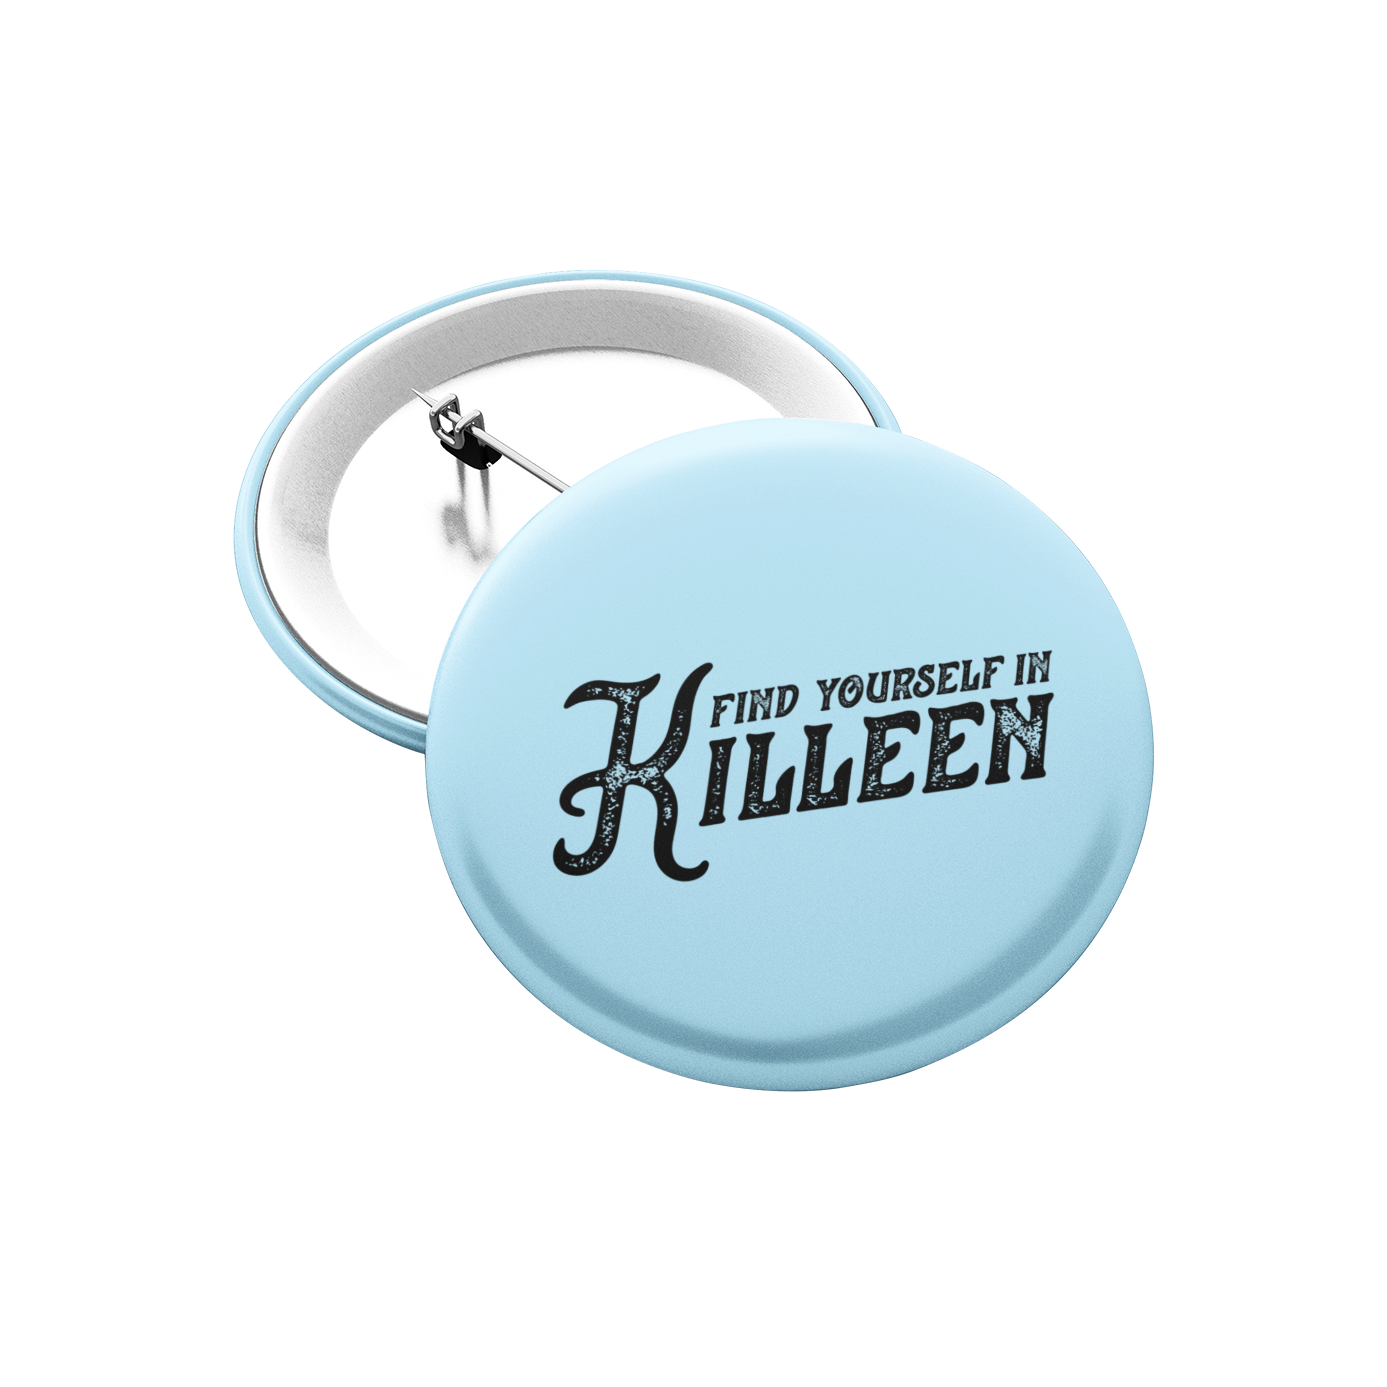 Killeen Texas Button - Find Yourself